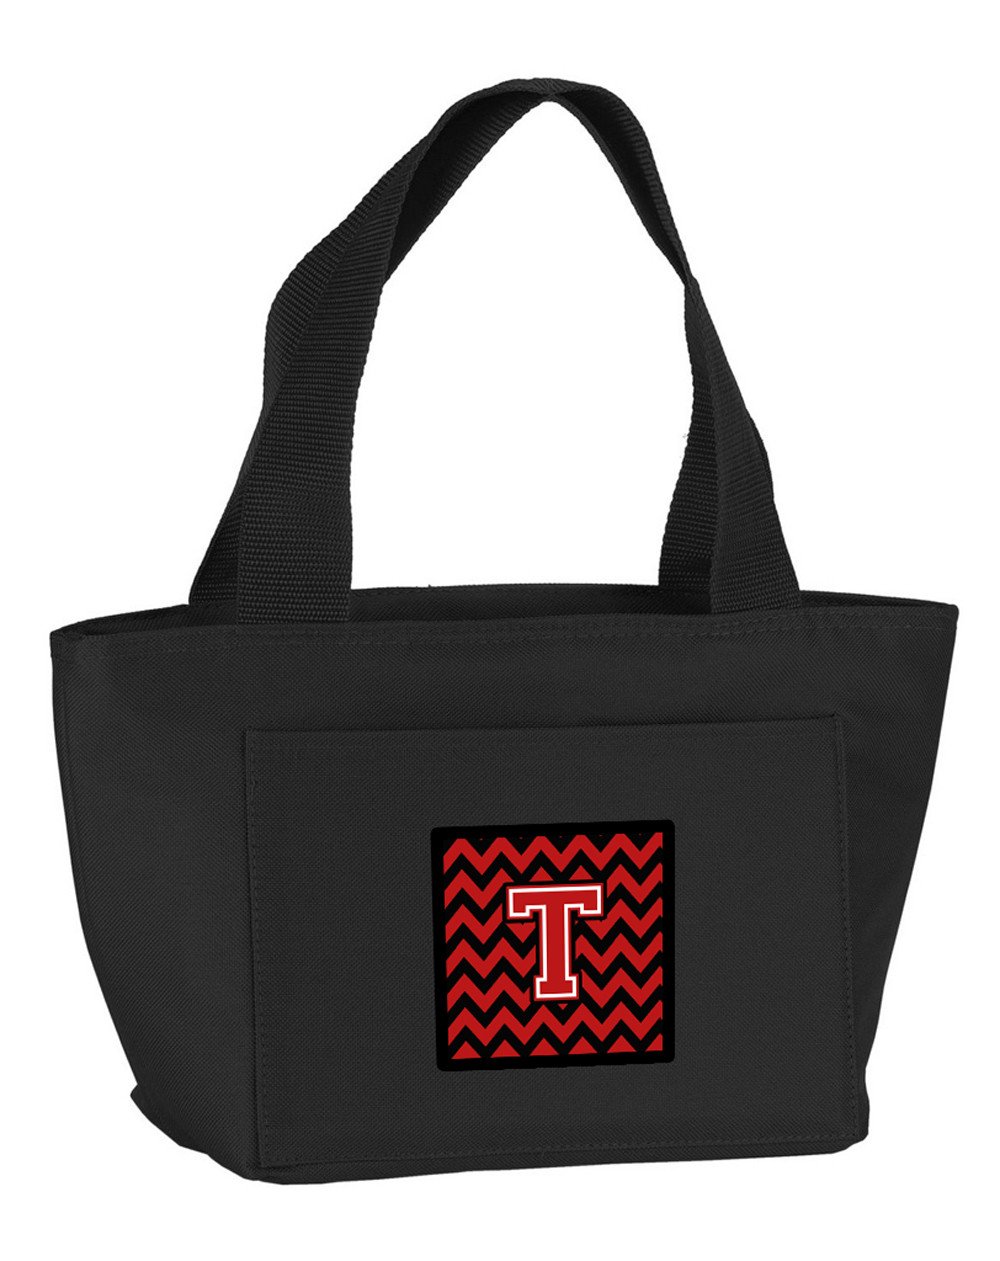 Letter T Chevron Black and Red   Lunch Bag CJ1047-TBK-8808 by Caroline's Treasures